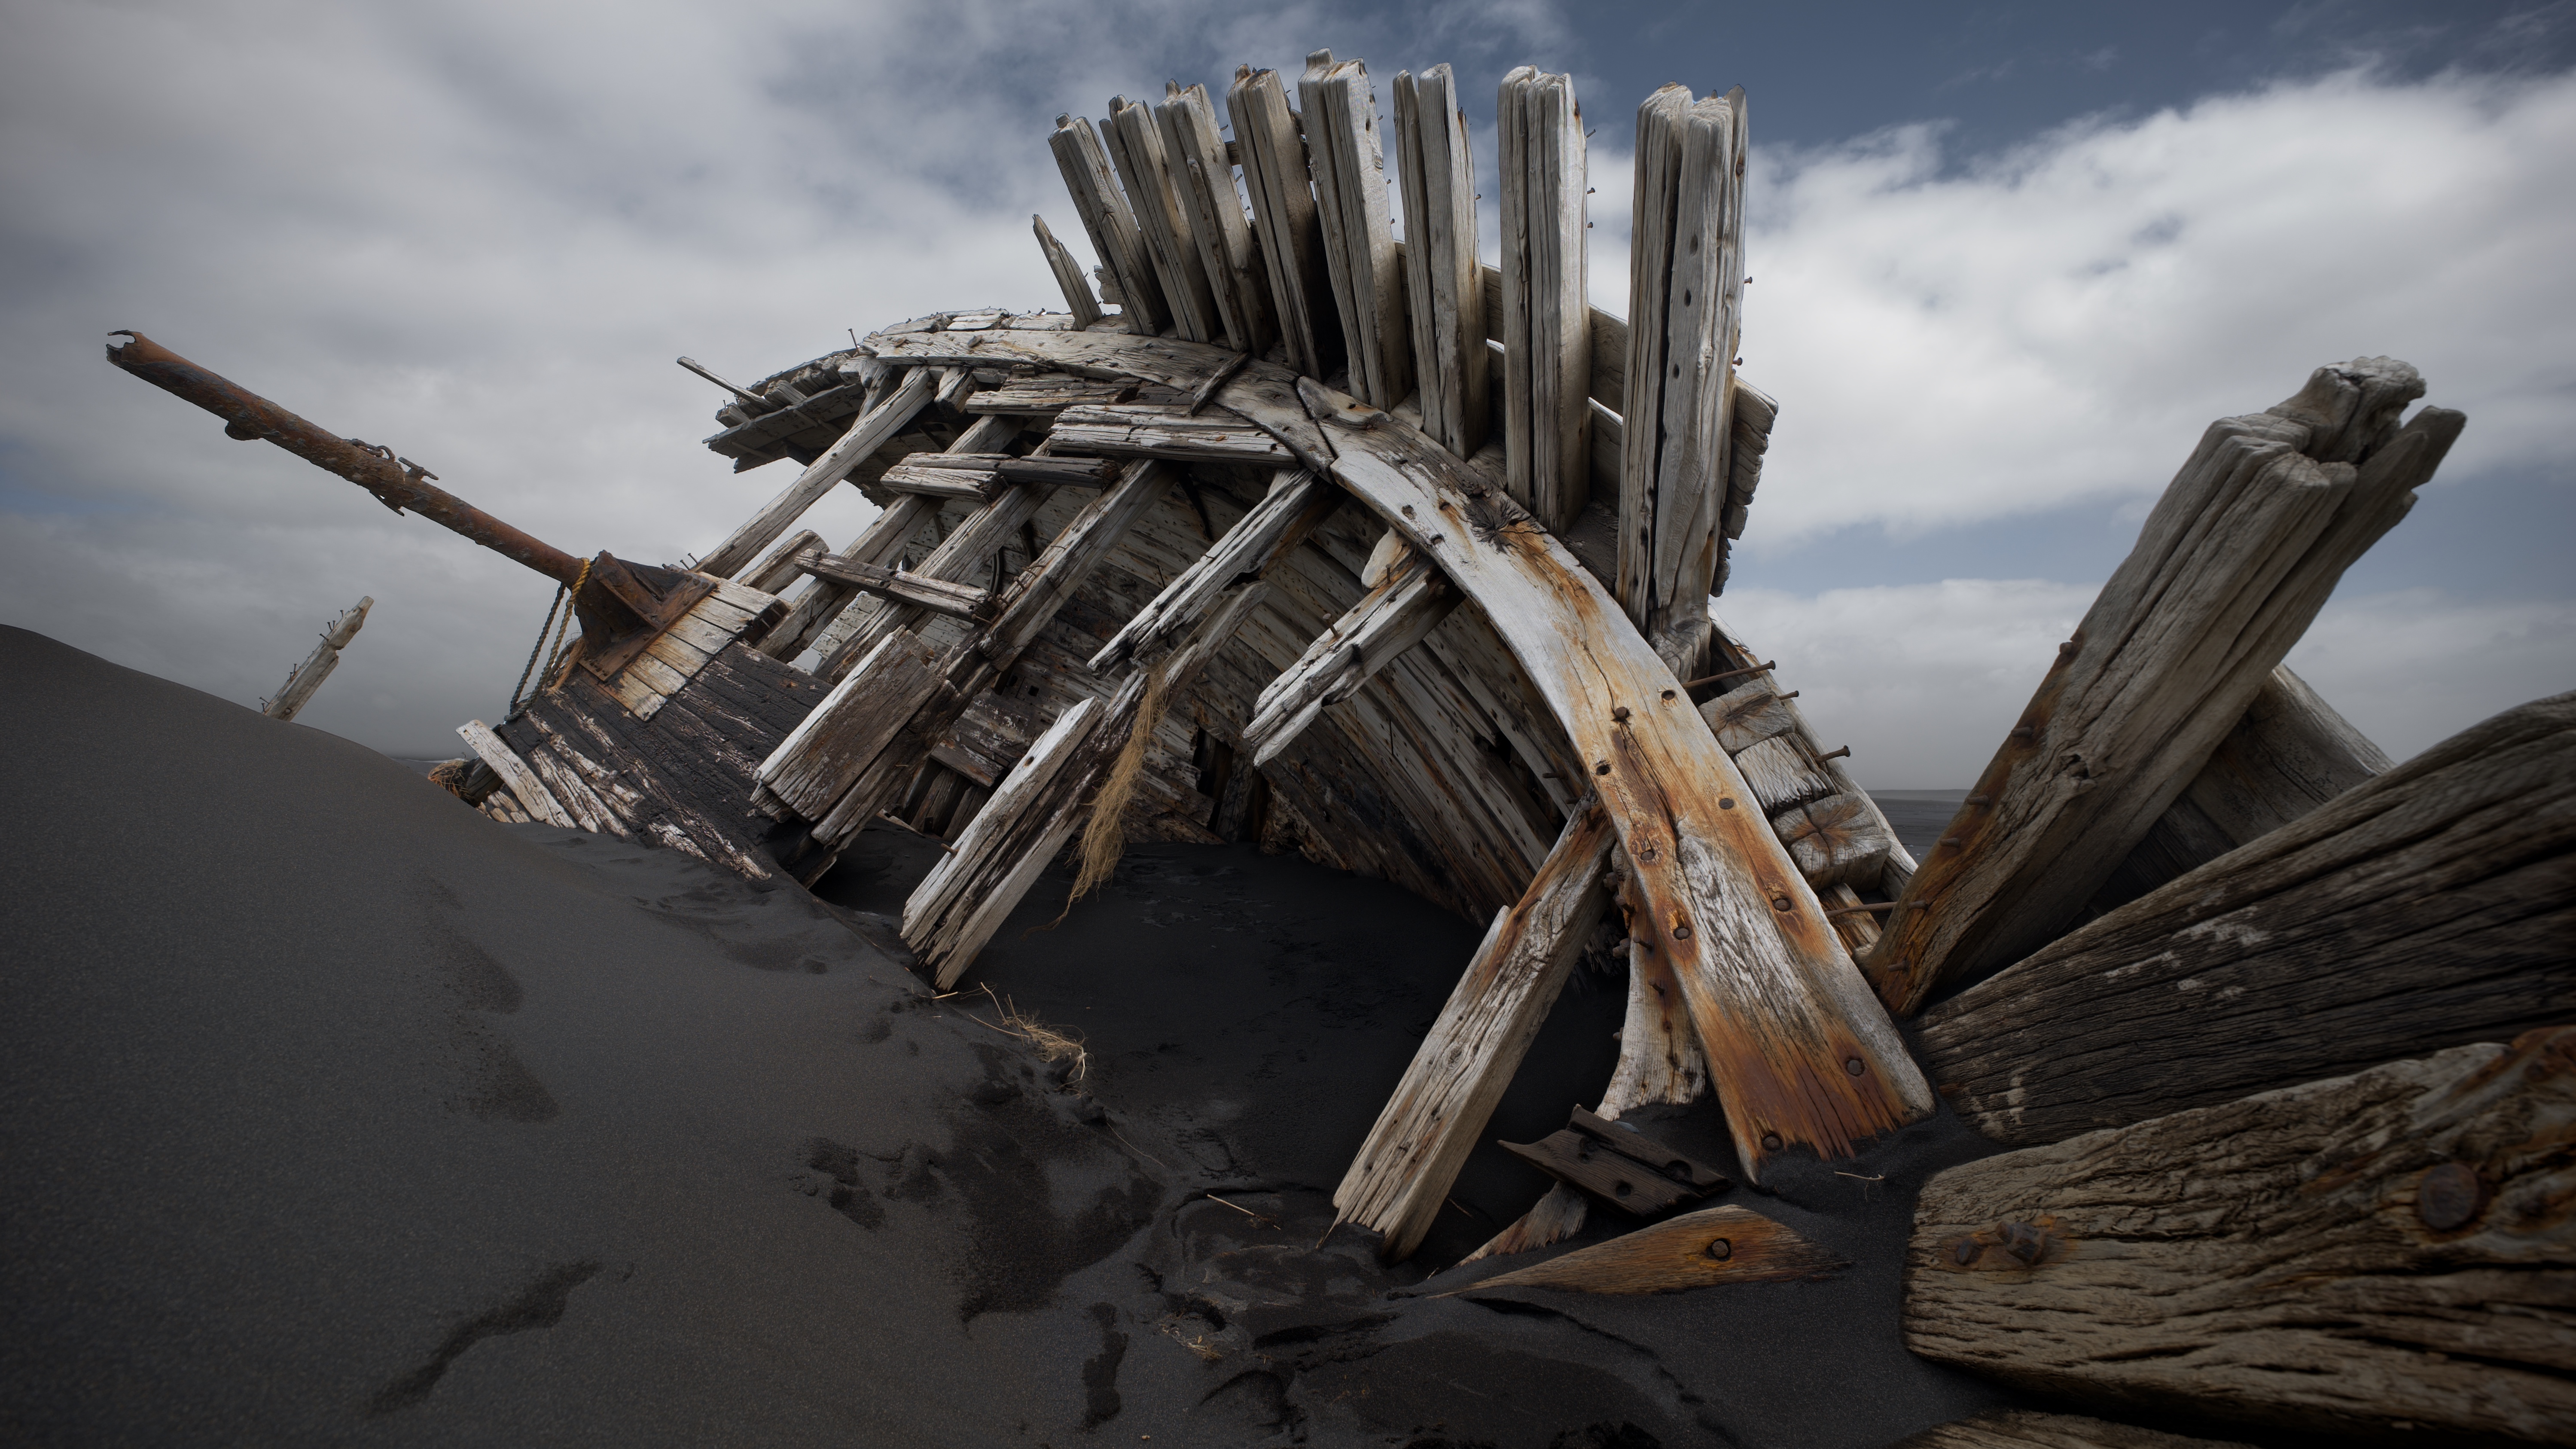 An abandoned wooden boat half buried in black sand